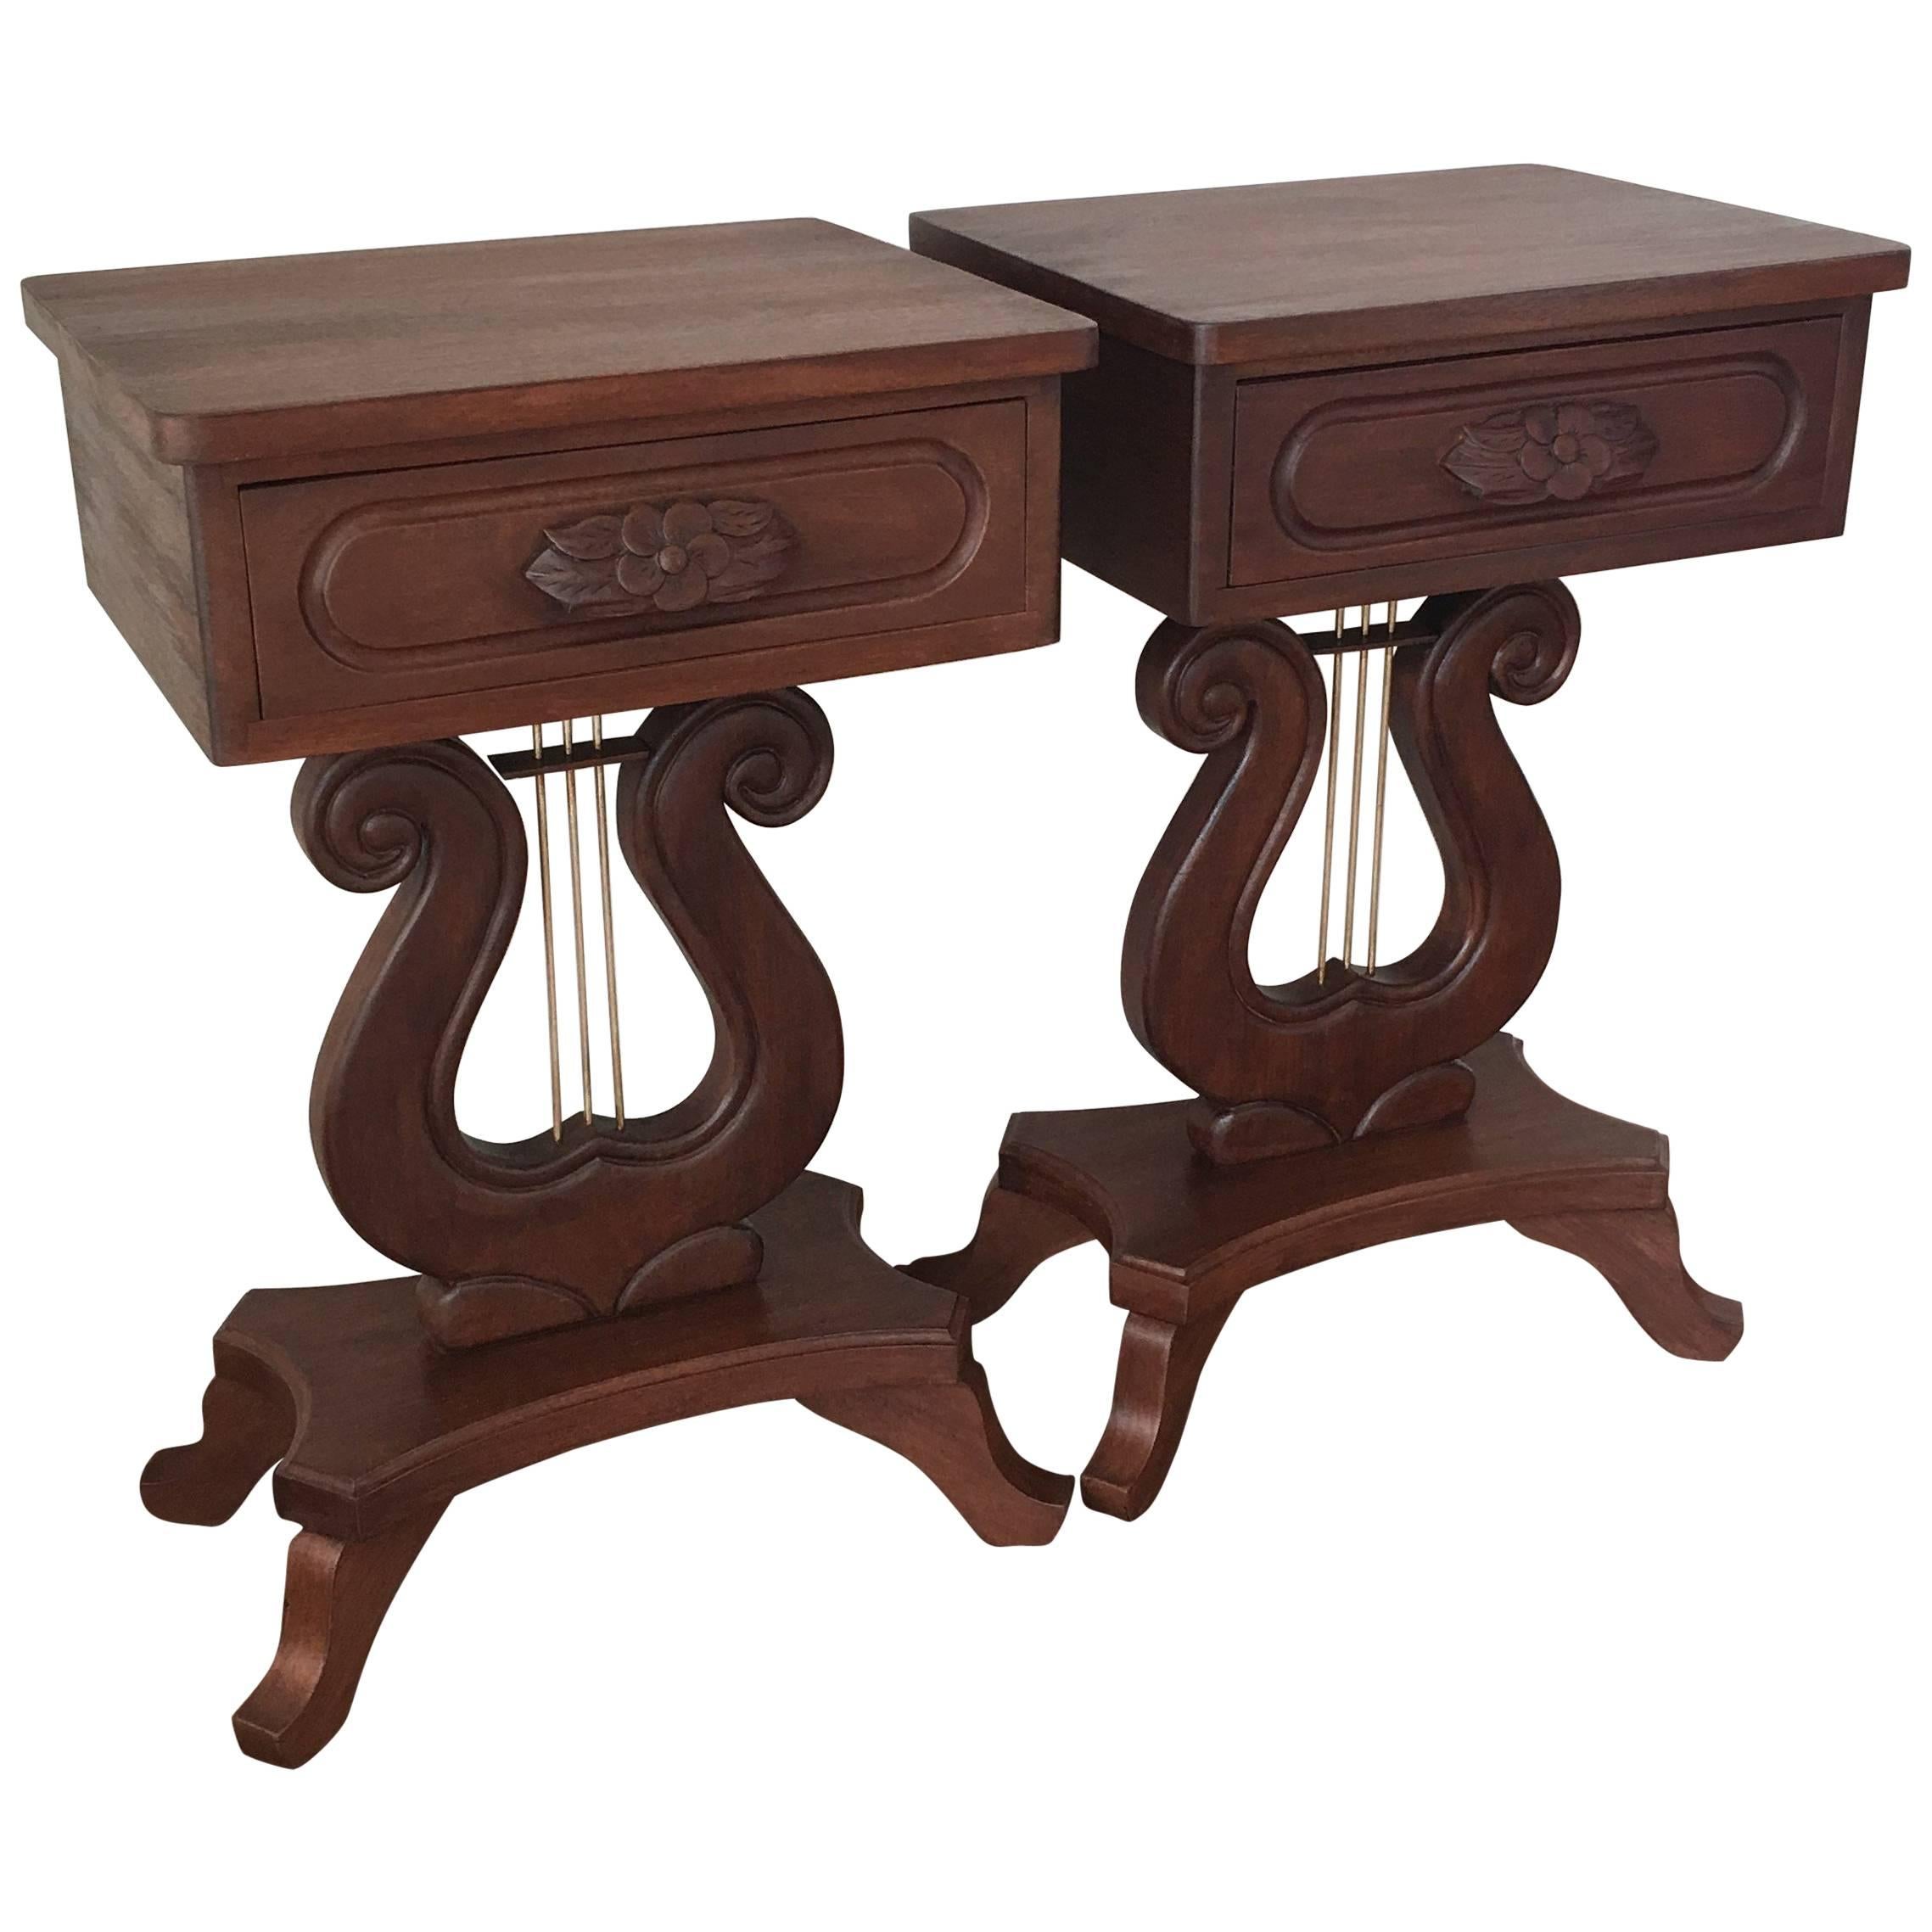 20th Century Pair of Nightstands in Mahogany with Lyre Leg and Bronze